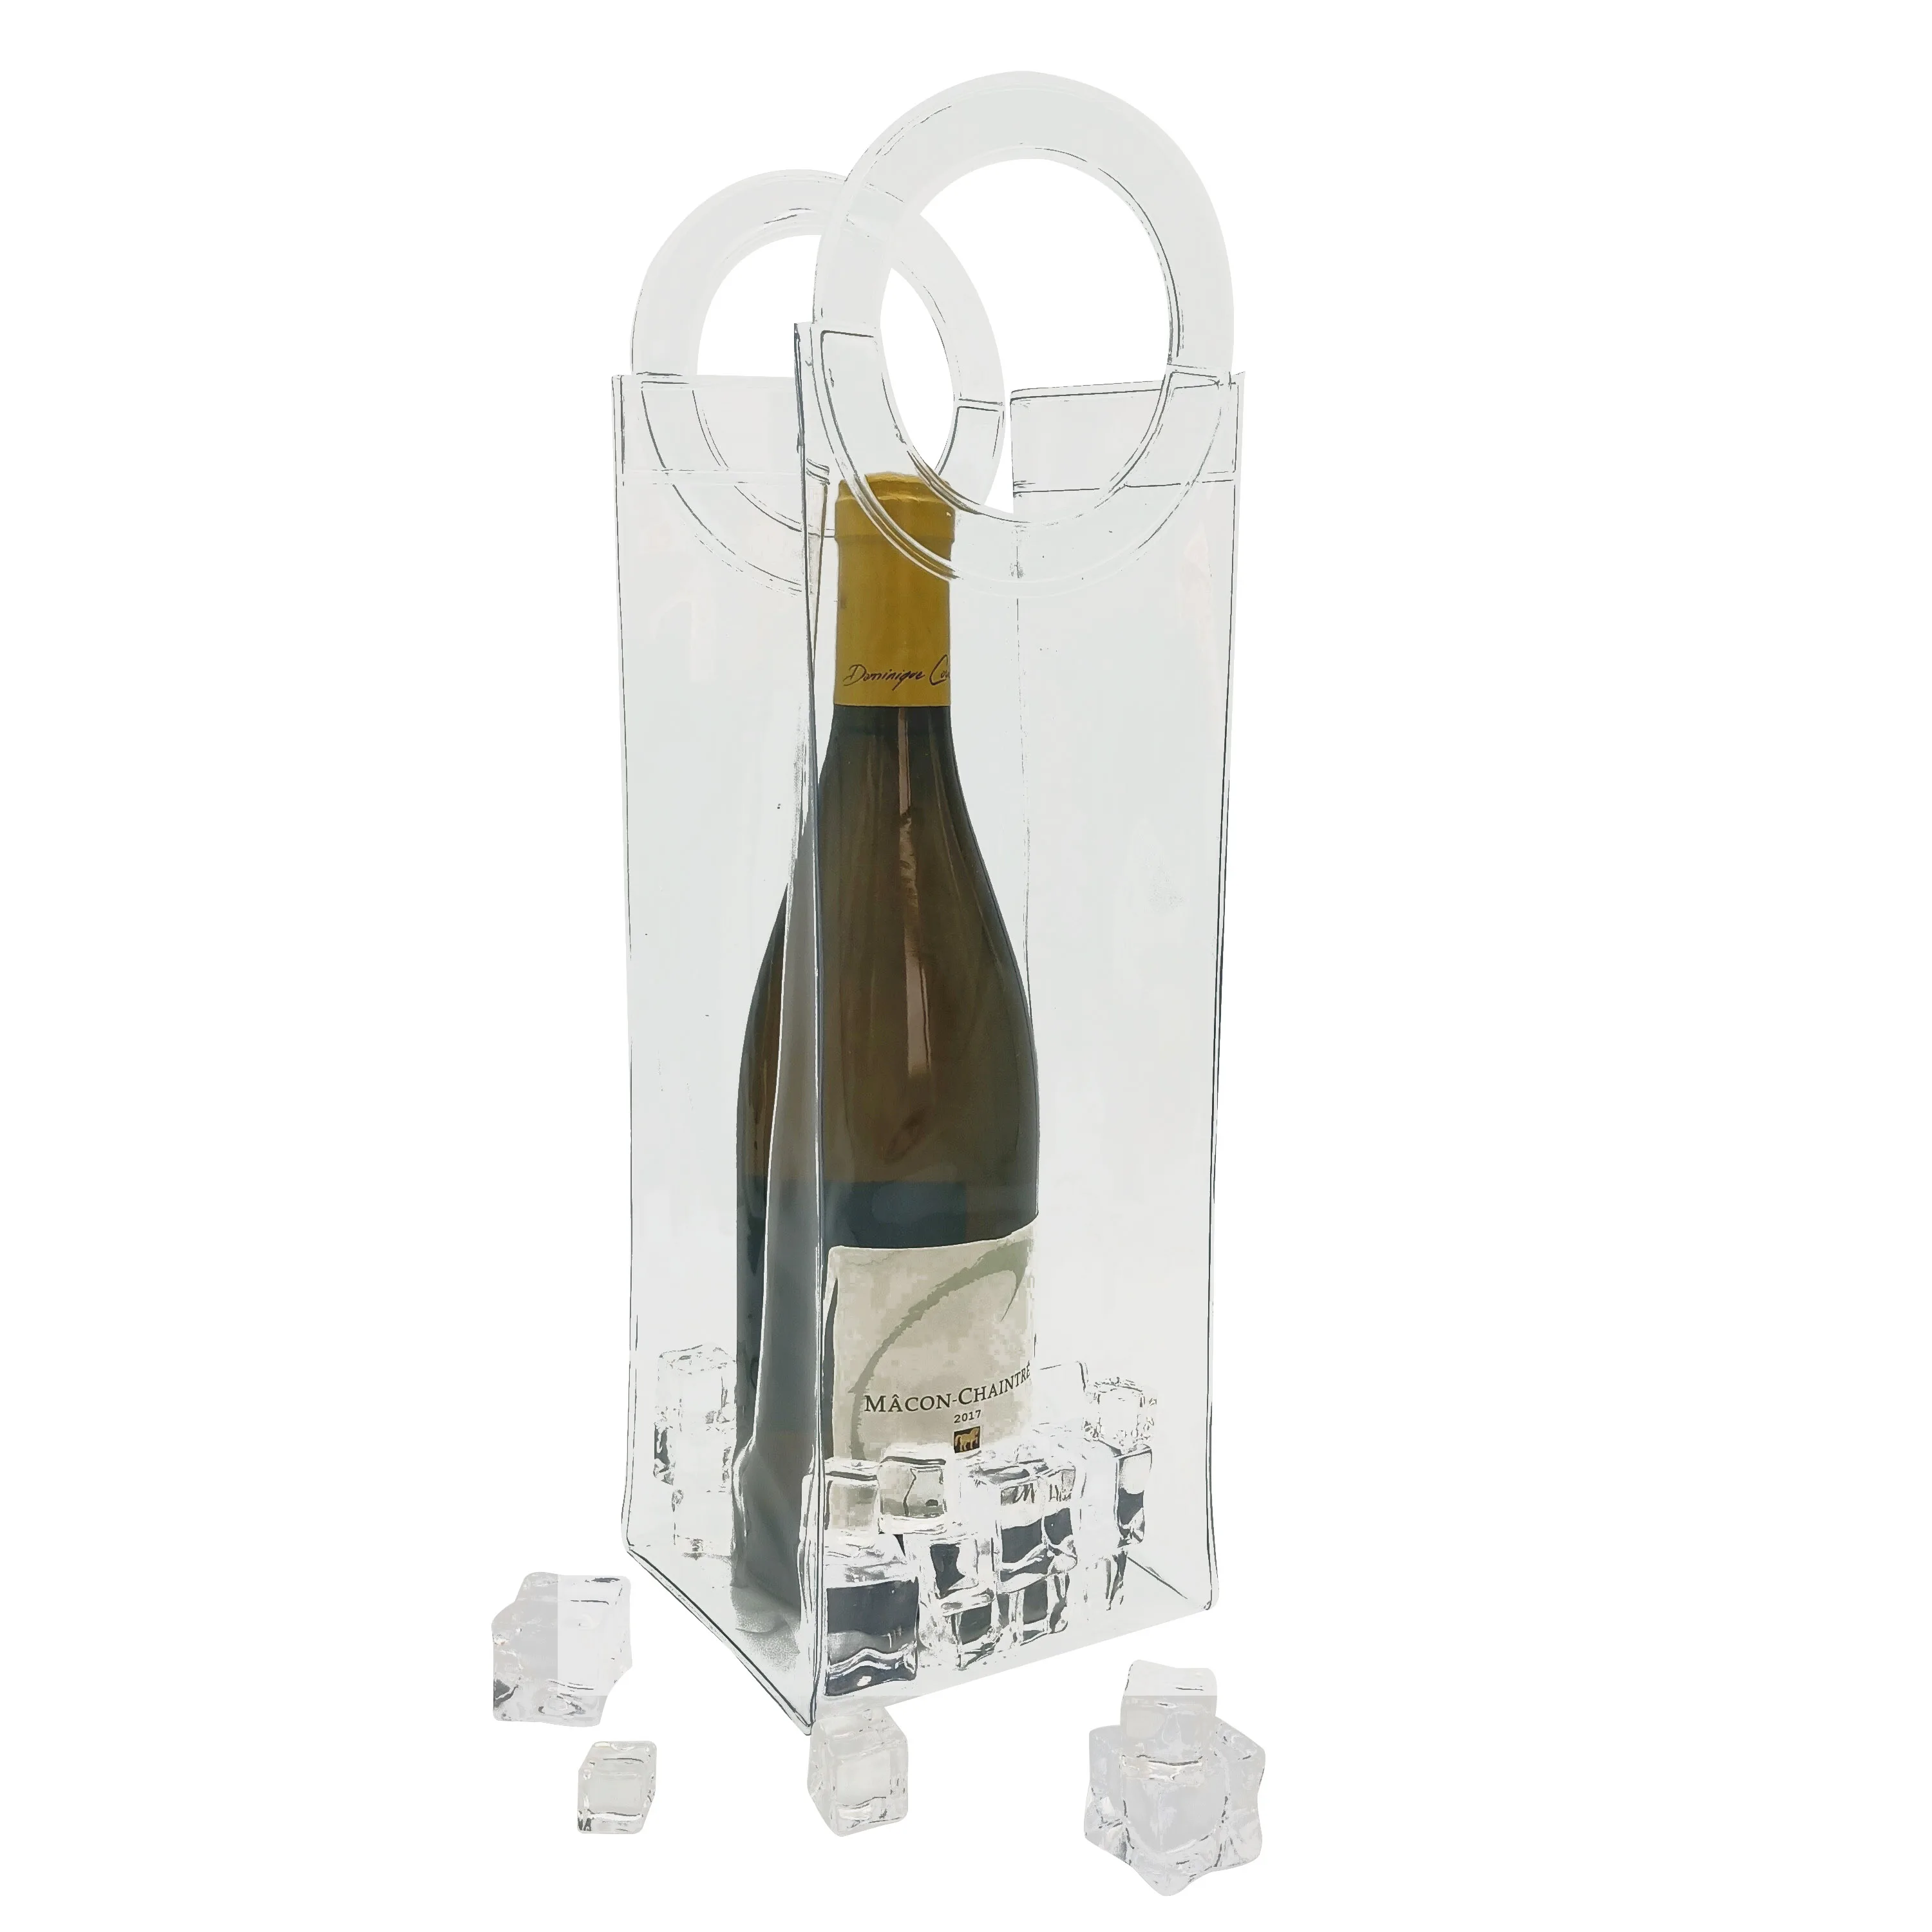 

Best Selling customize logo clear PVC Collapsible ice wine chiller bag for sale, Customized color